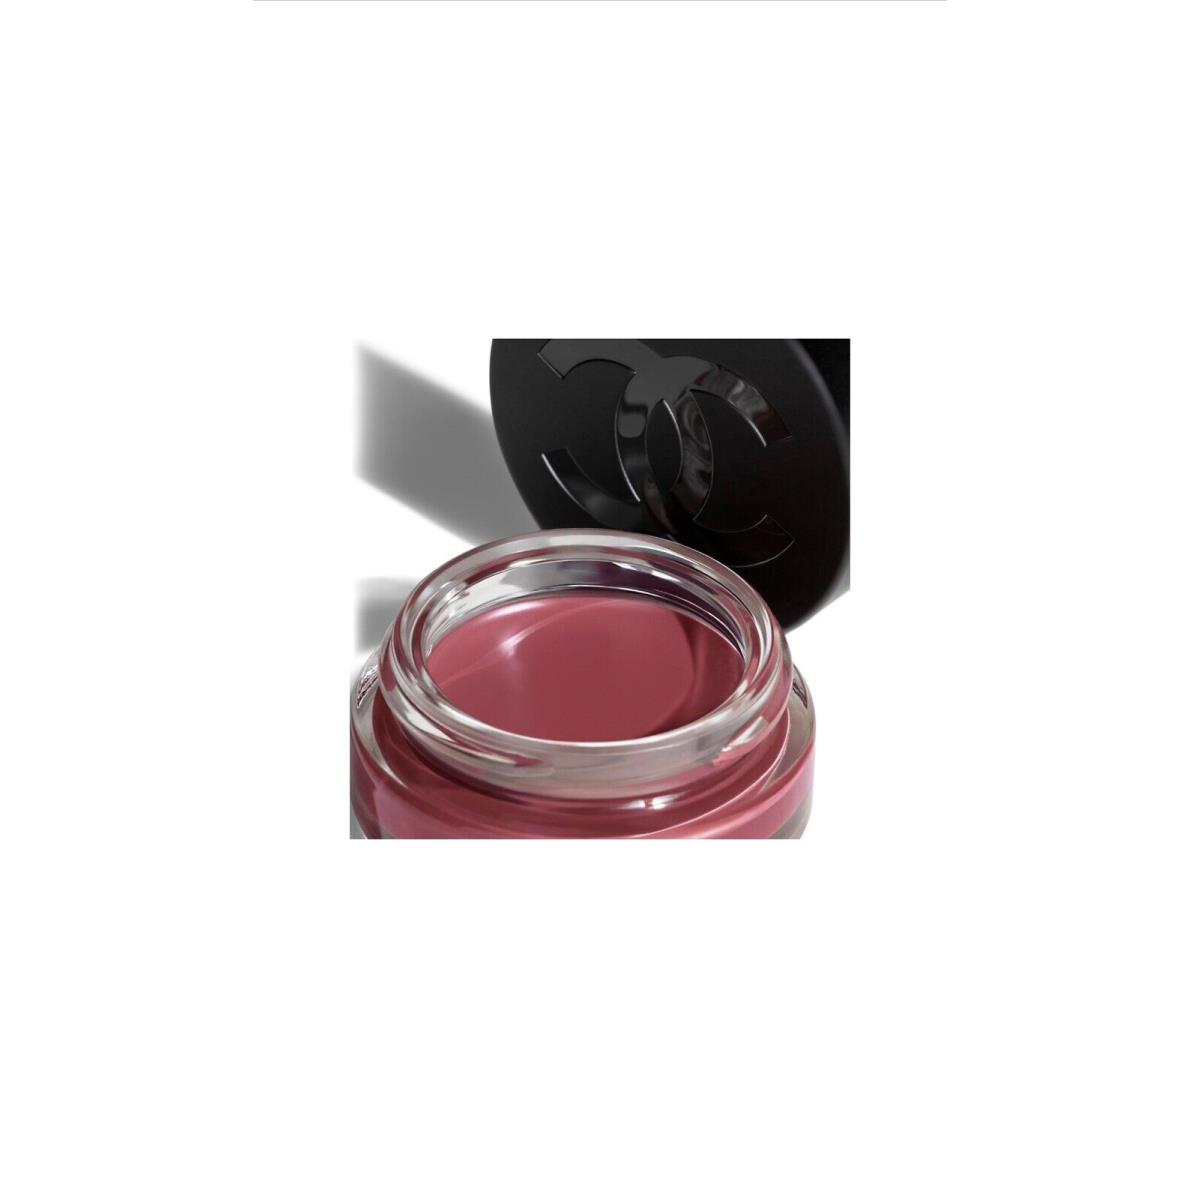 Chanel No 1 De Chanel Lip and Cheek Balm 5 Lively Rosewood 6.5g / 0.23oz